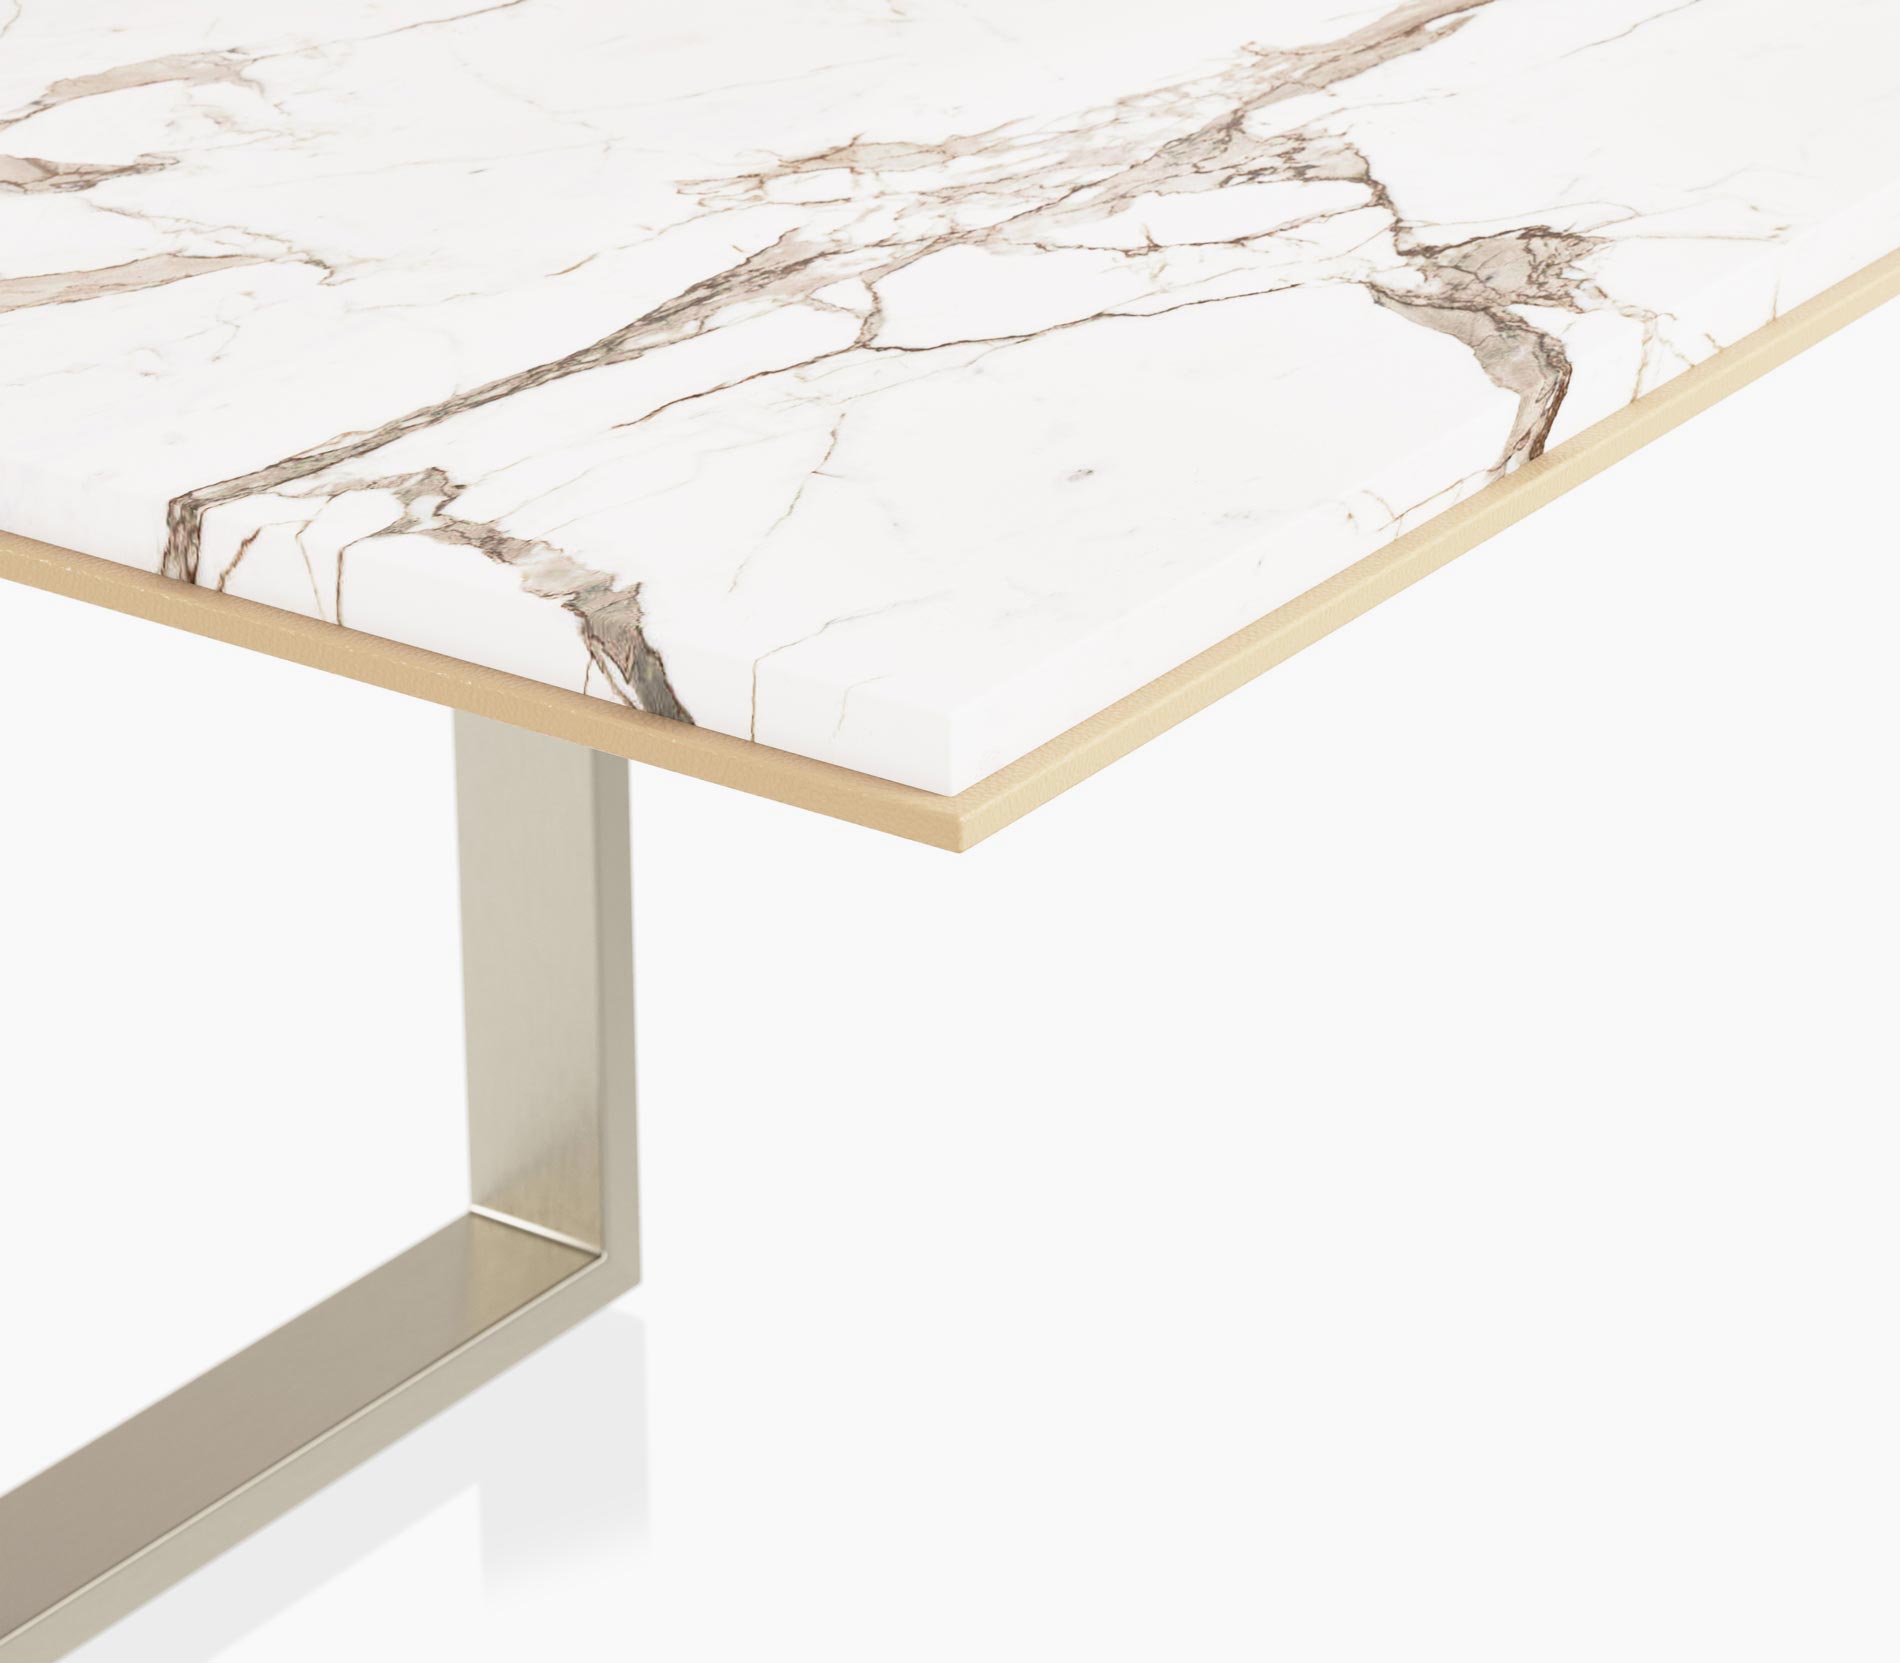 Edge detail on a Highline Conference Table in calacatta gold stone with a leather edge and satin nickel base